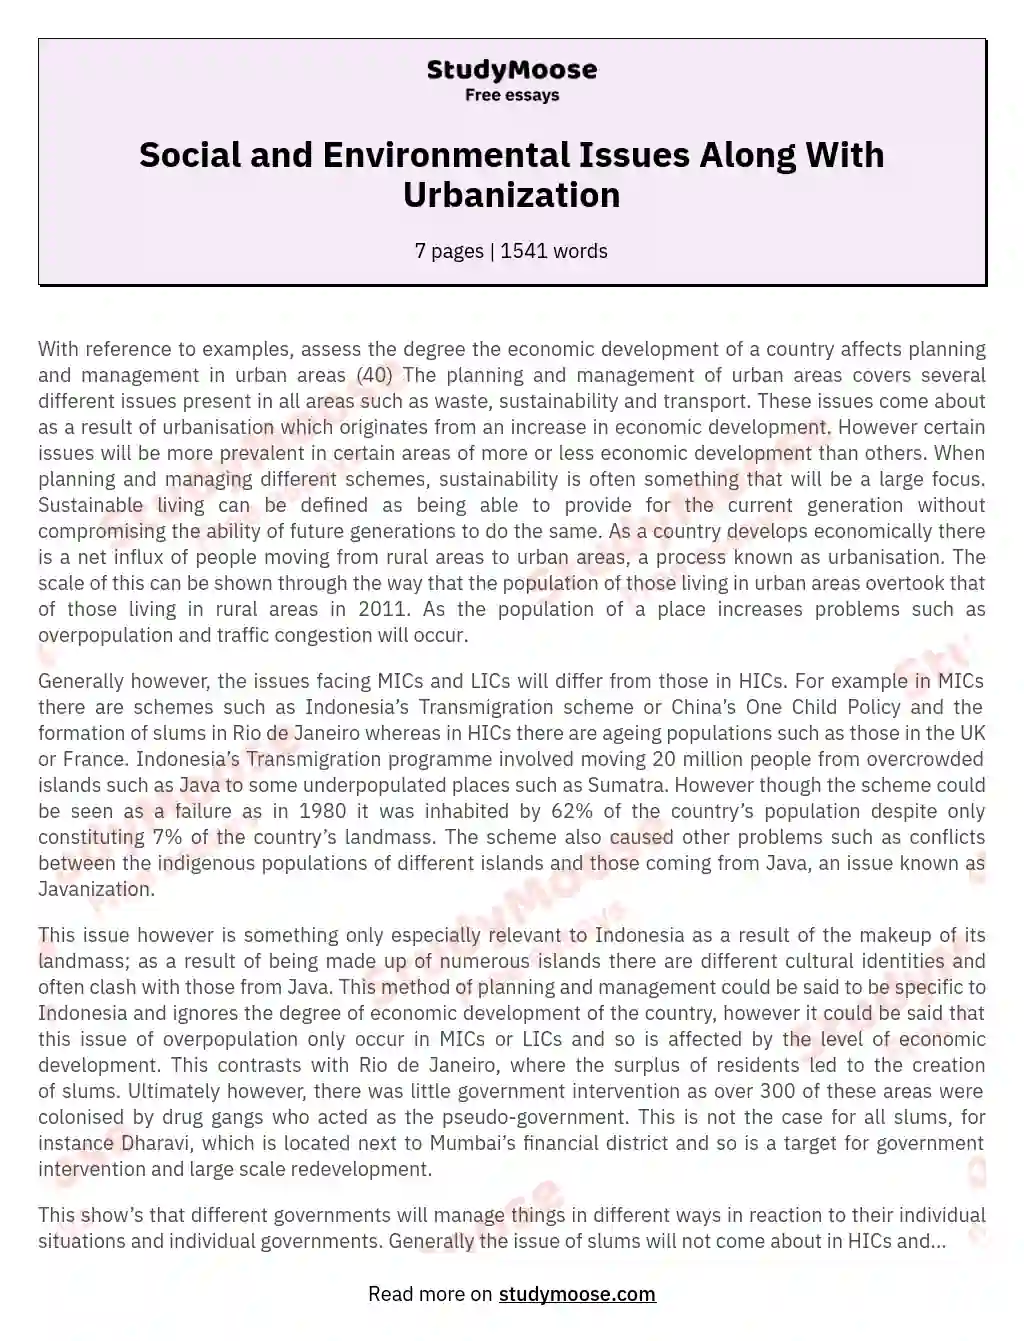 Social and Environmental Issues Along With Urbanization essay